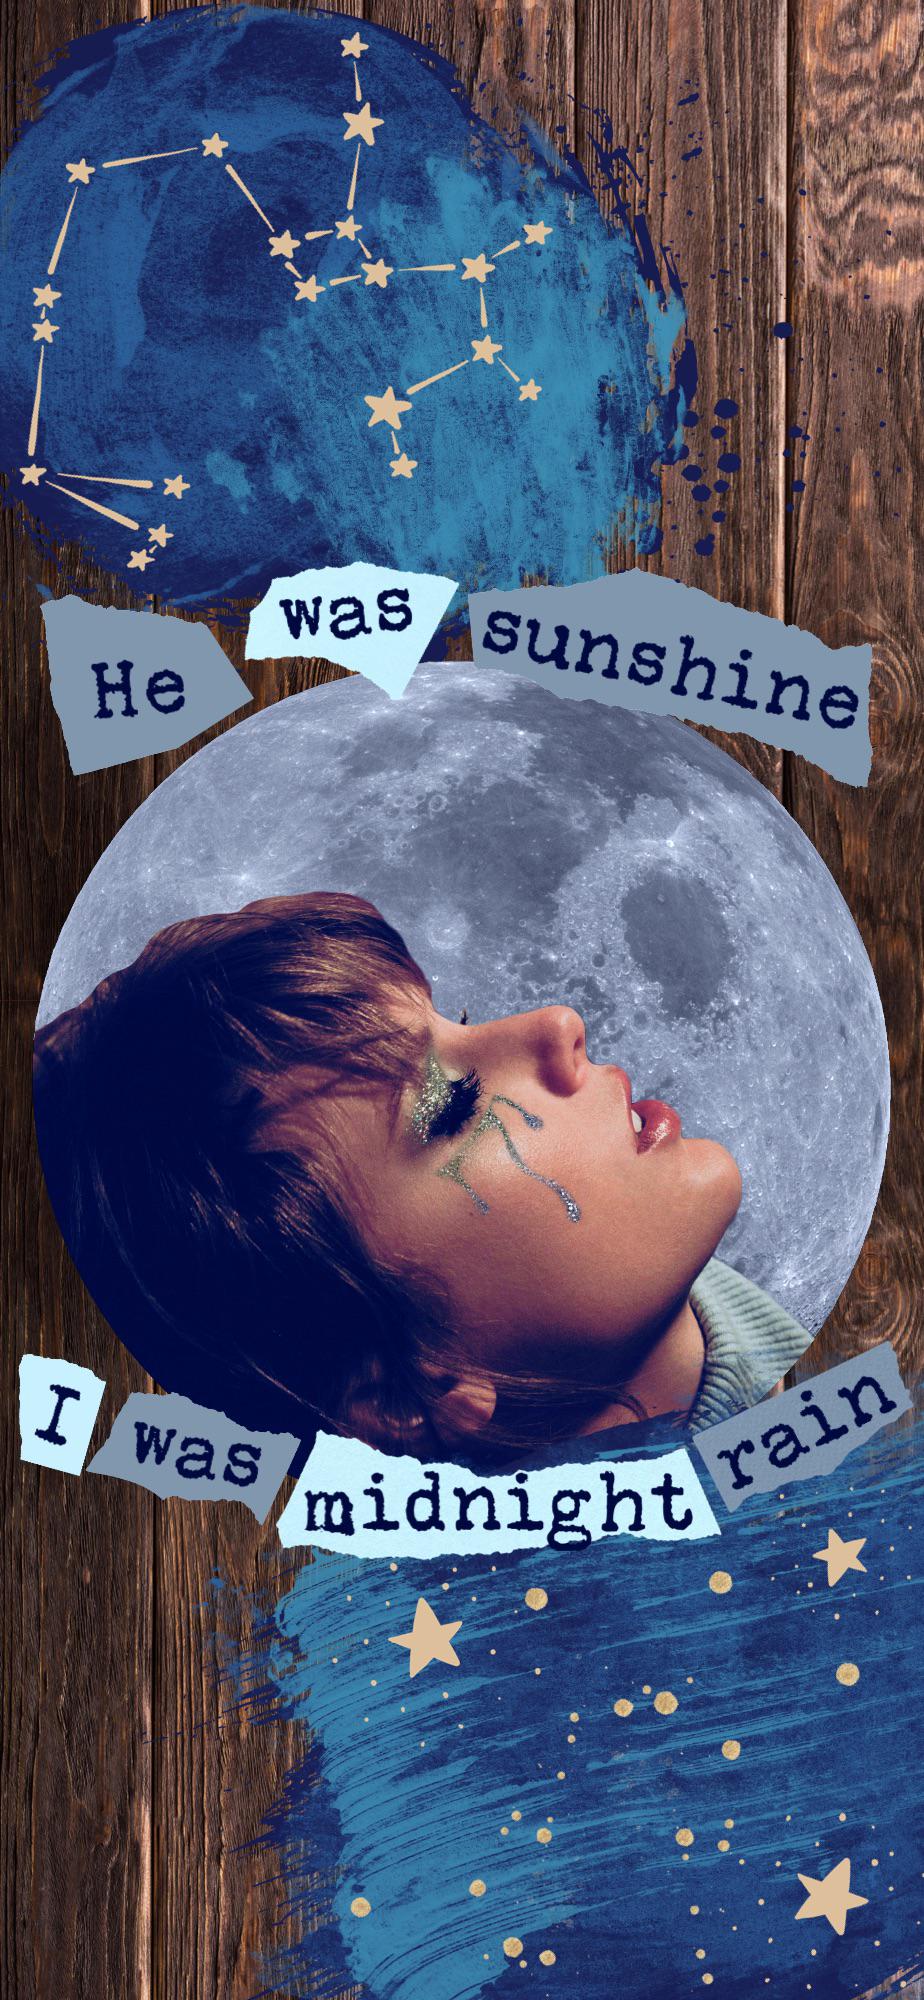 Phone wallpaper of a young man looking up at the moon with the words 